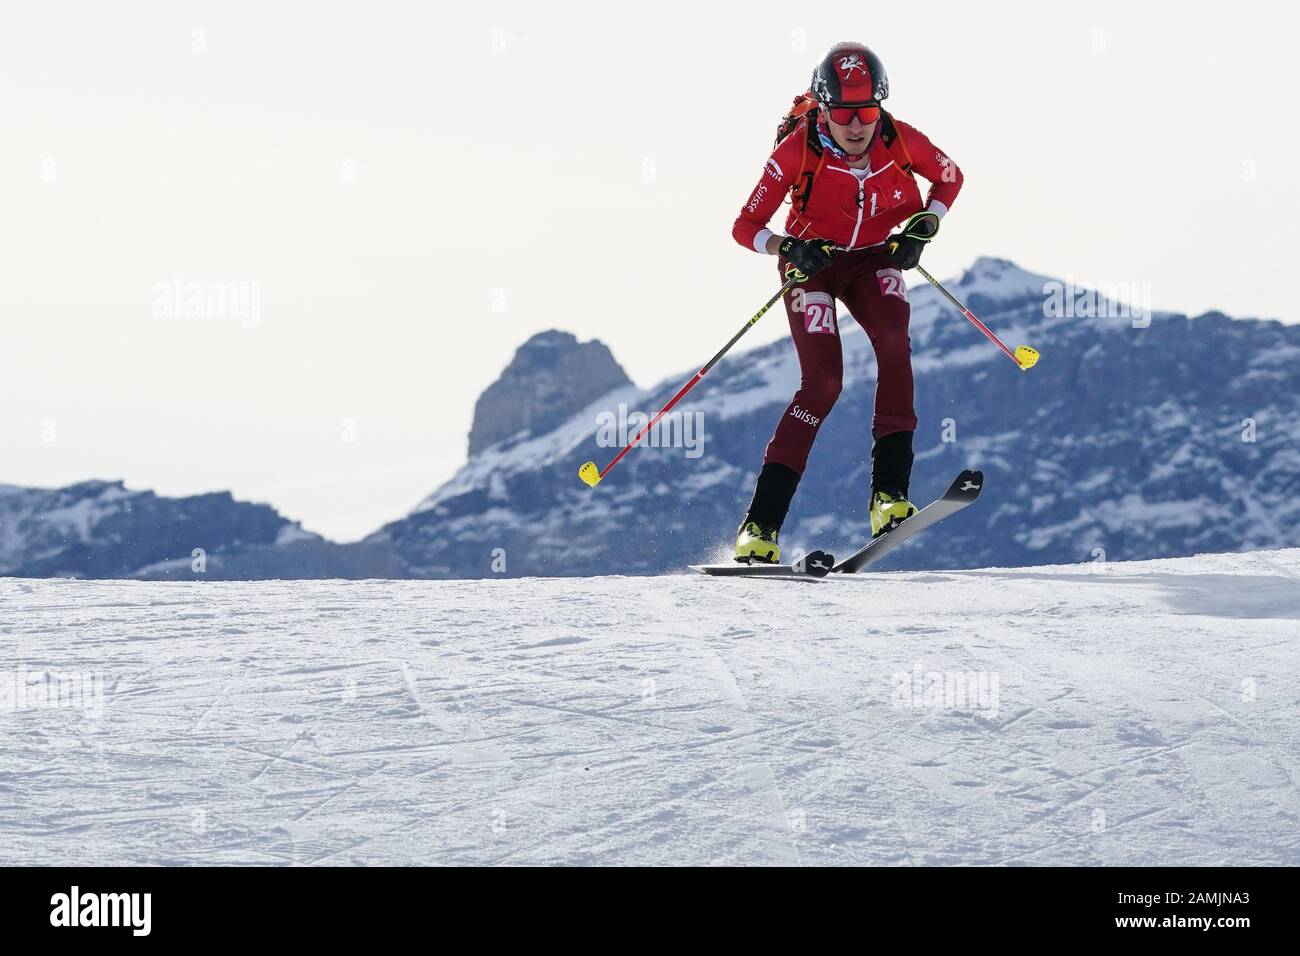 Villars. 13th Jan, 2020. Thomas Bussard of Switzerland competes during the men's sprint of ski mountaineering at the 3rd Winter Youth Olympic Games at Villars Winter Park in Villars, Switzerland on Jan. 13, 2020. Credit: Bai Xueqi/Xinhua/Alamy Live News Stock Photo